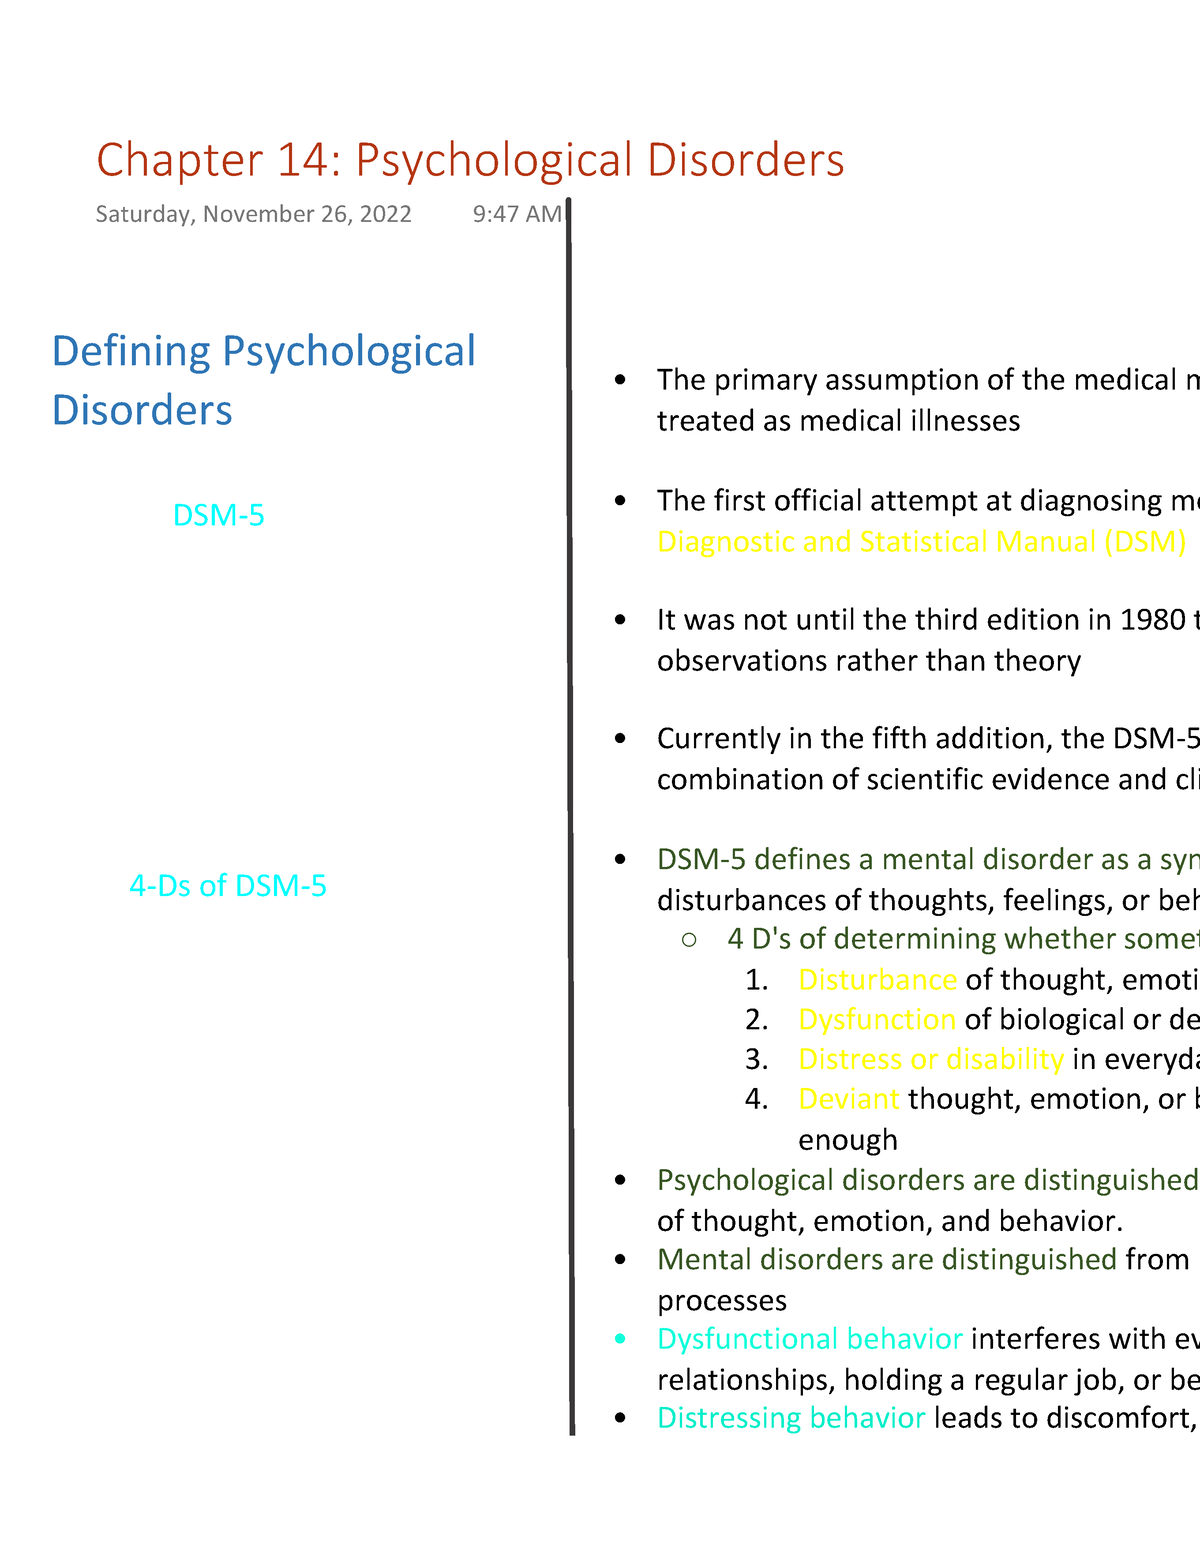 case studies on psychological disorders